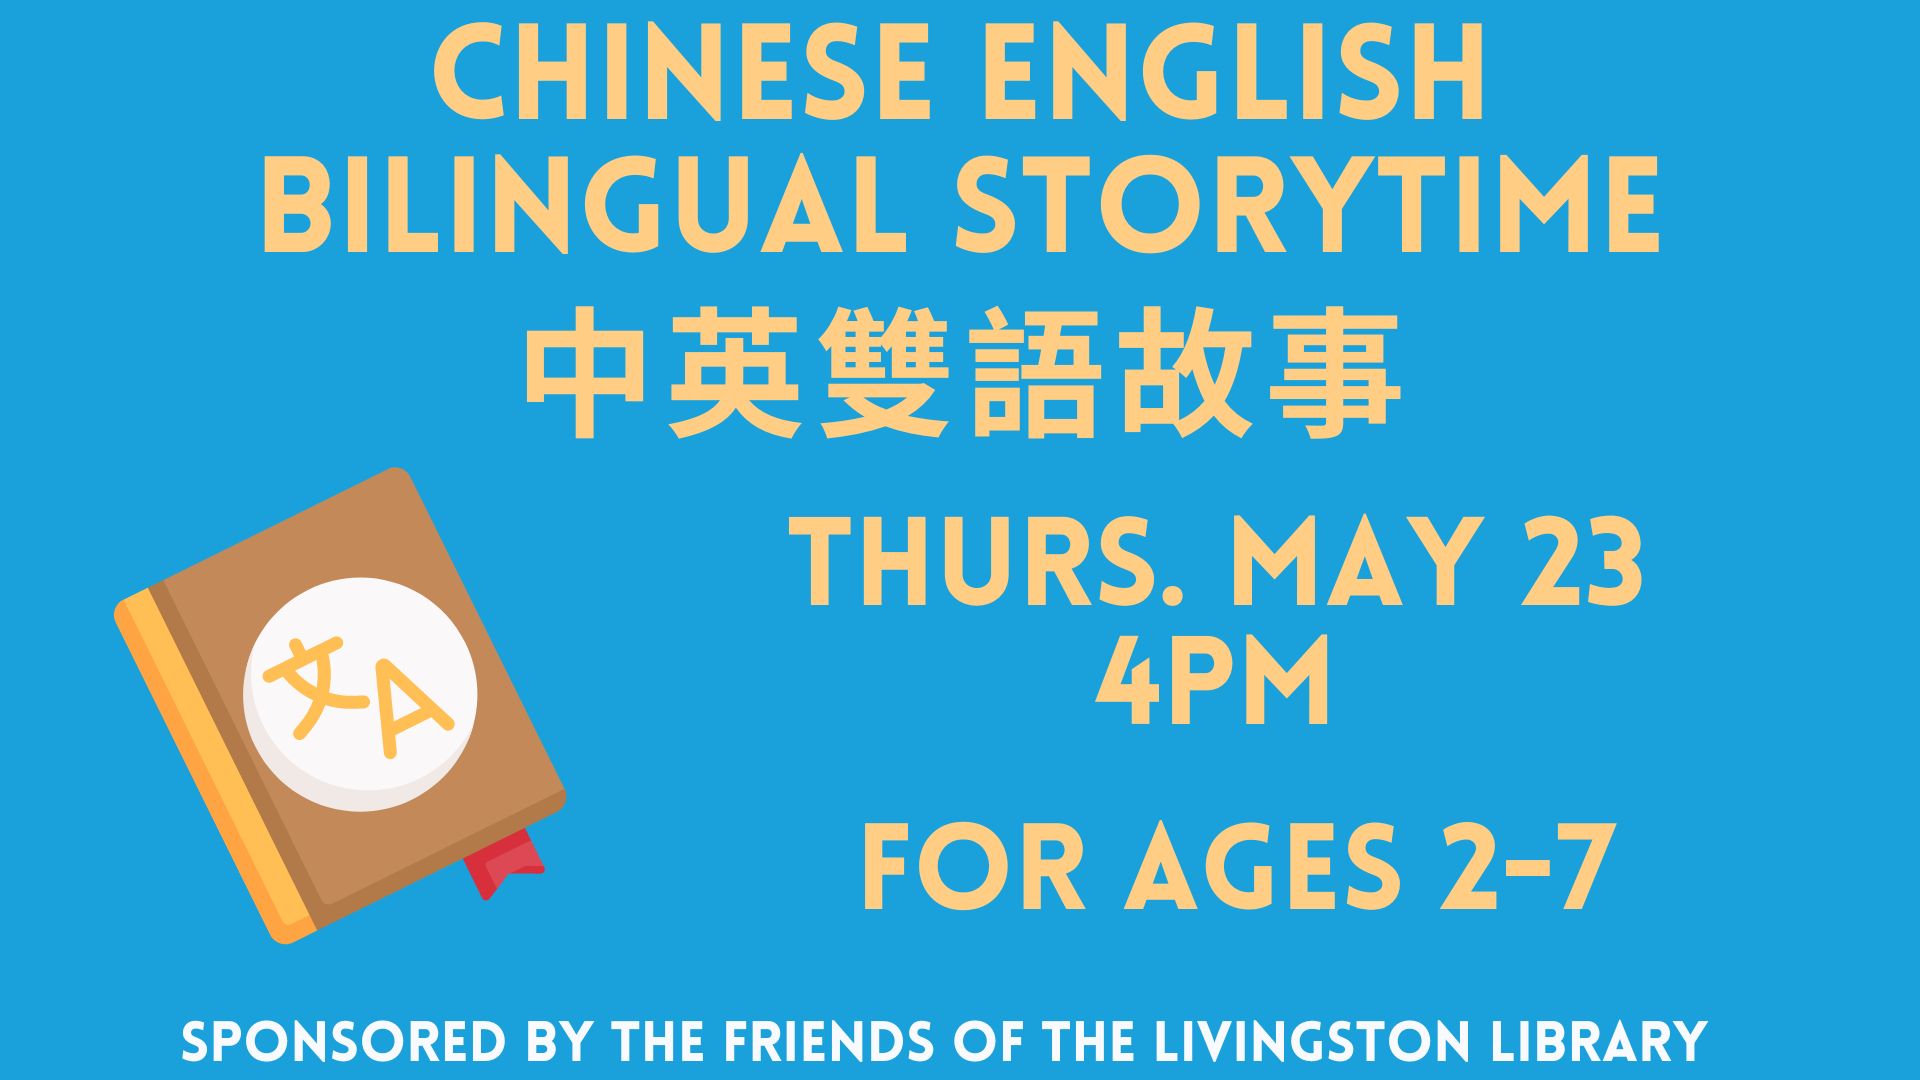 Chinese English Bilingual Storytime. 中英雙語故事. Thurs May 23rd 4pm. For ages 2-7.